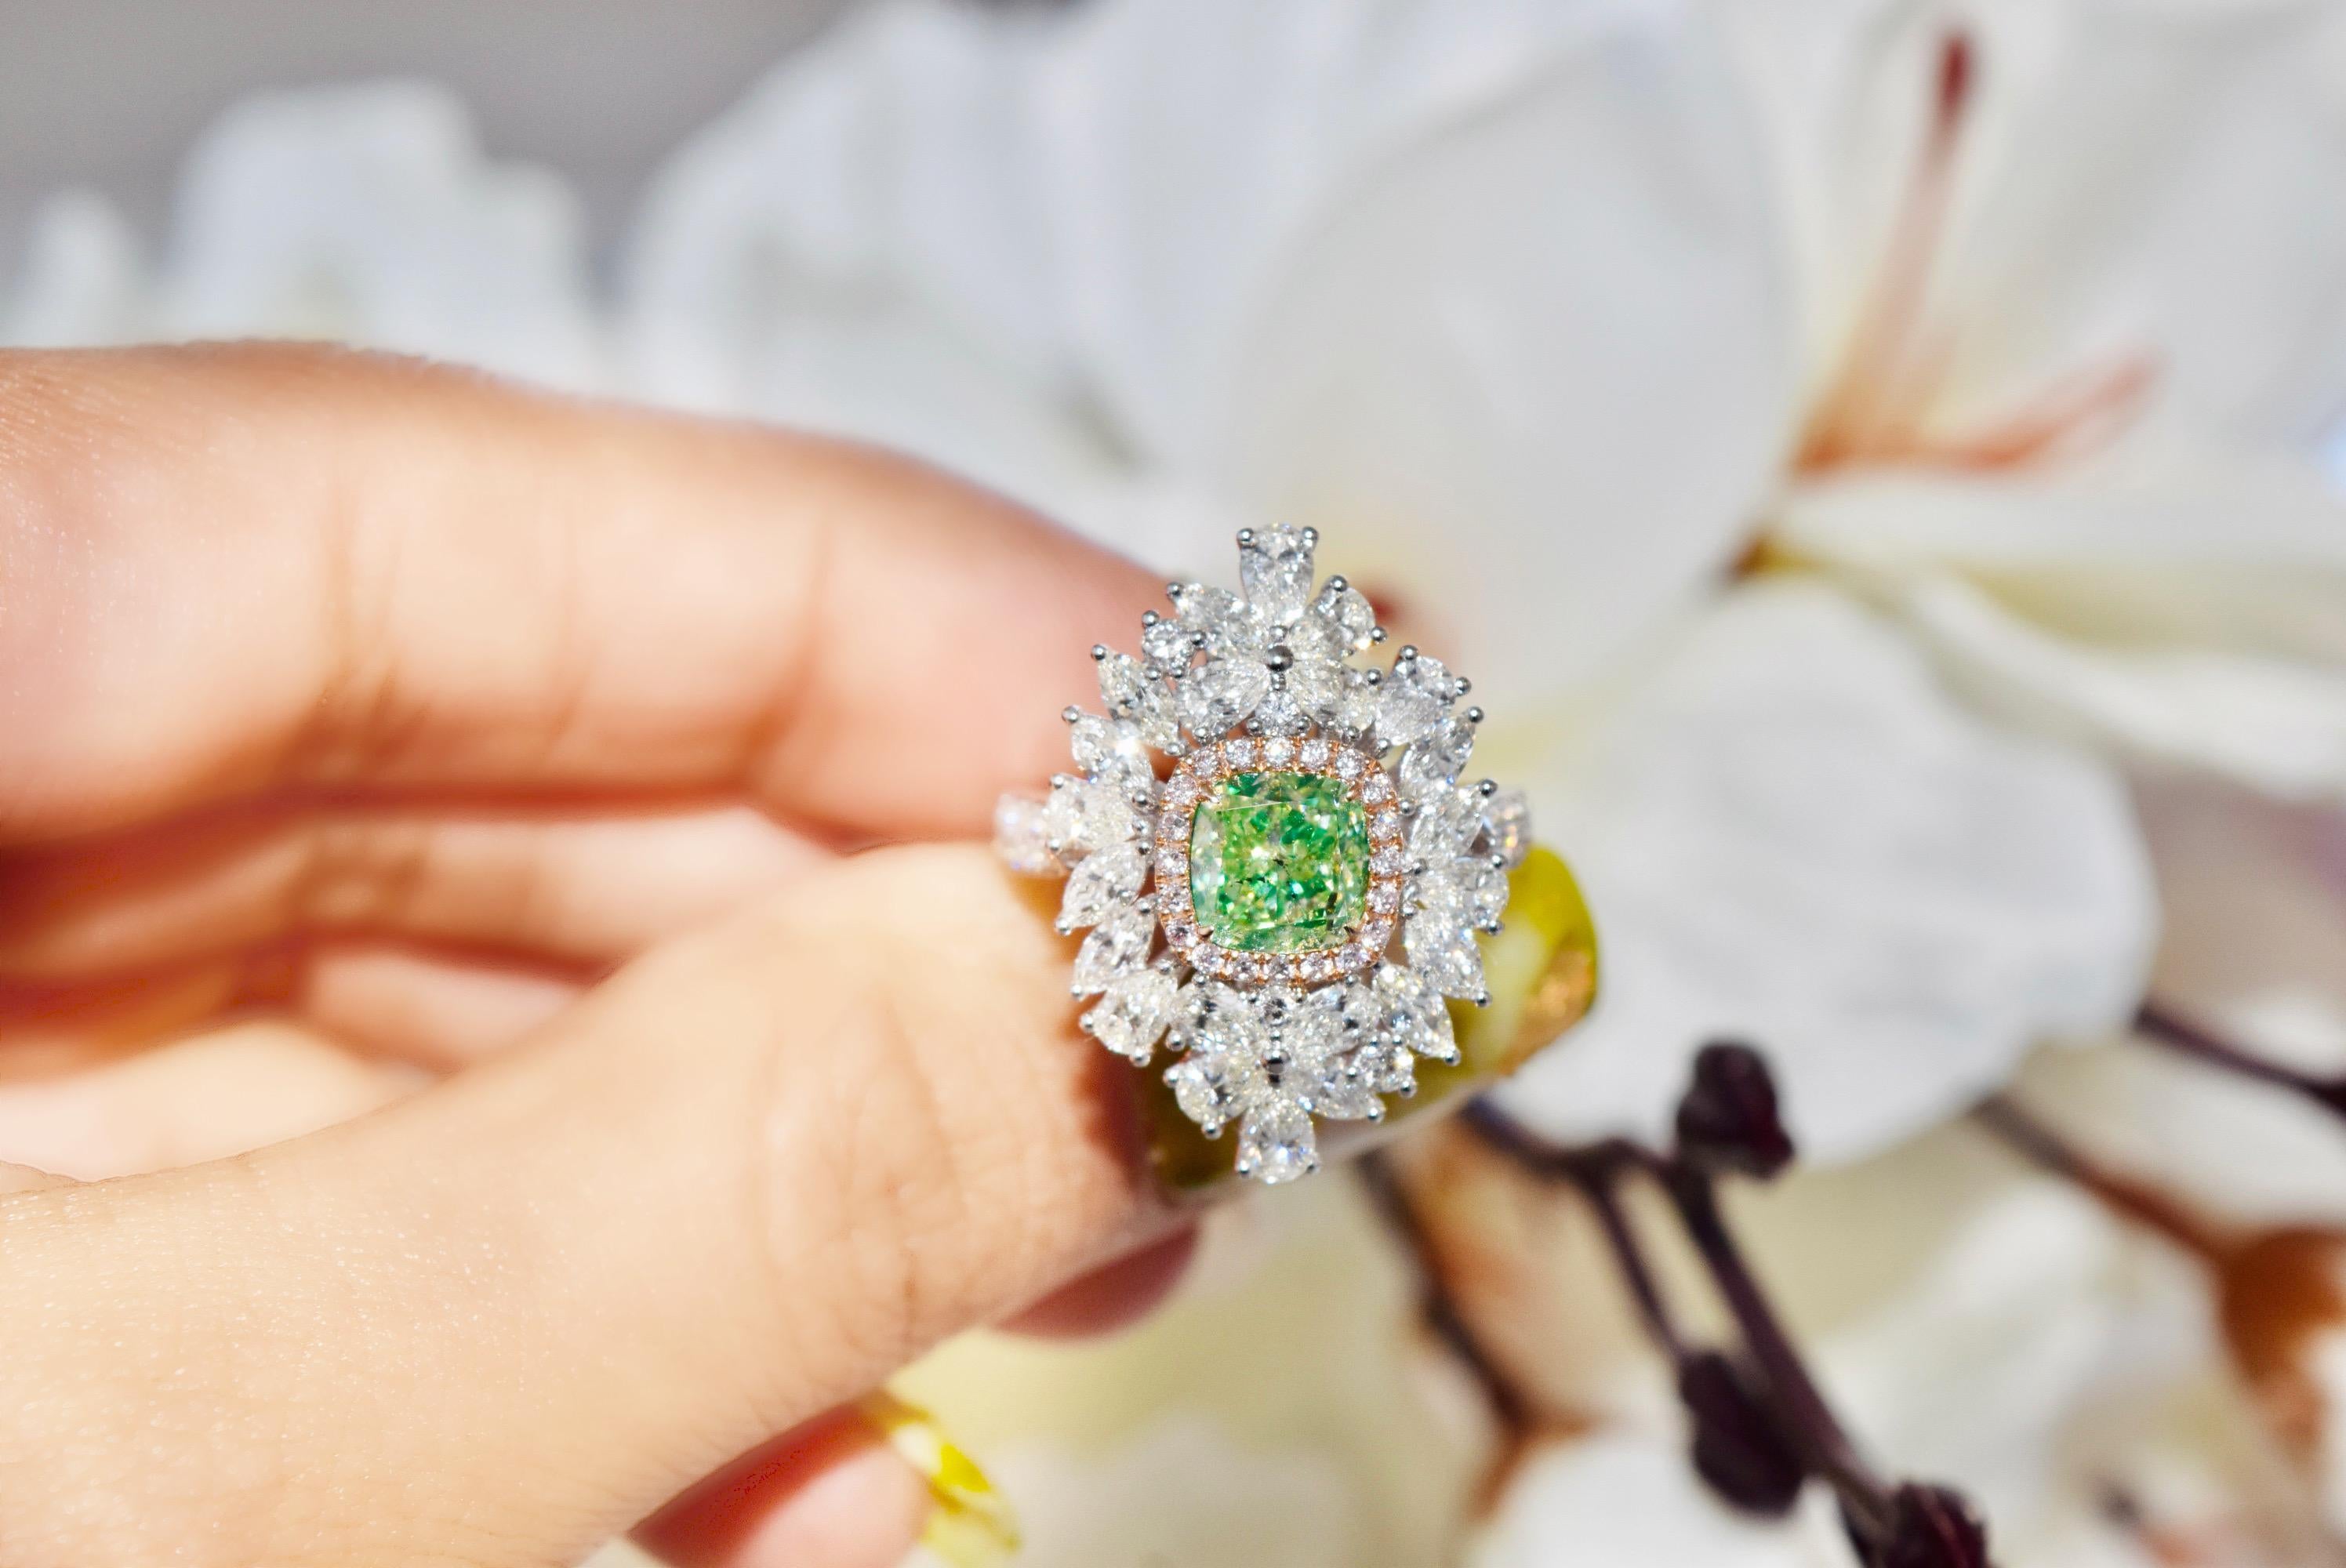 **100% NATURAL FANCY COLOUR DIAMOND JEWELLERIES**

✪ Jewelry Details ✪

♦ MAIN STONE DETAILS

➛ Stone Shape: Cushion
➛ Stone Color: Fancy Greenish Yellow
➛ Stone Weight: 1.52 carats
➛ Clarity: SI2
➛ GIA certified

♦ SIDE STONE DETAILS

➛ Side mq